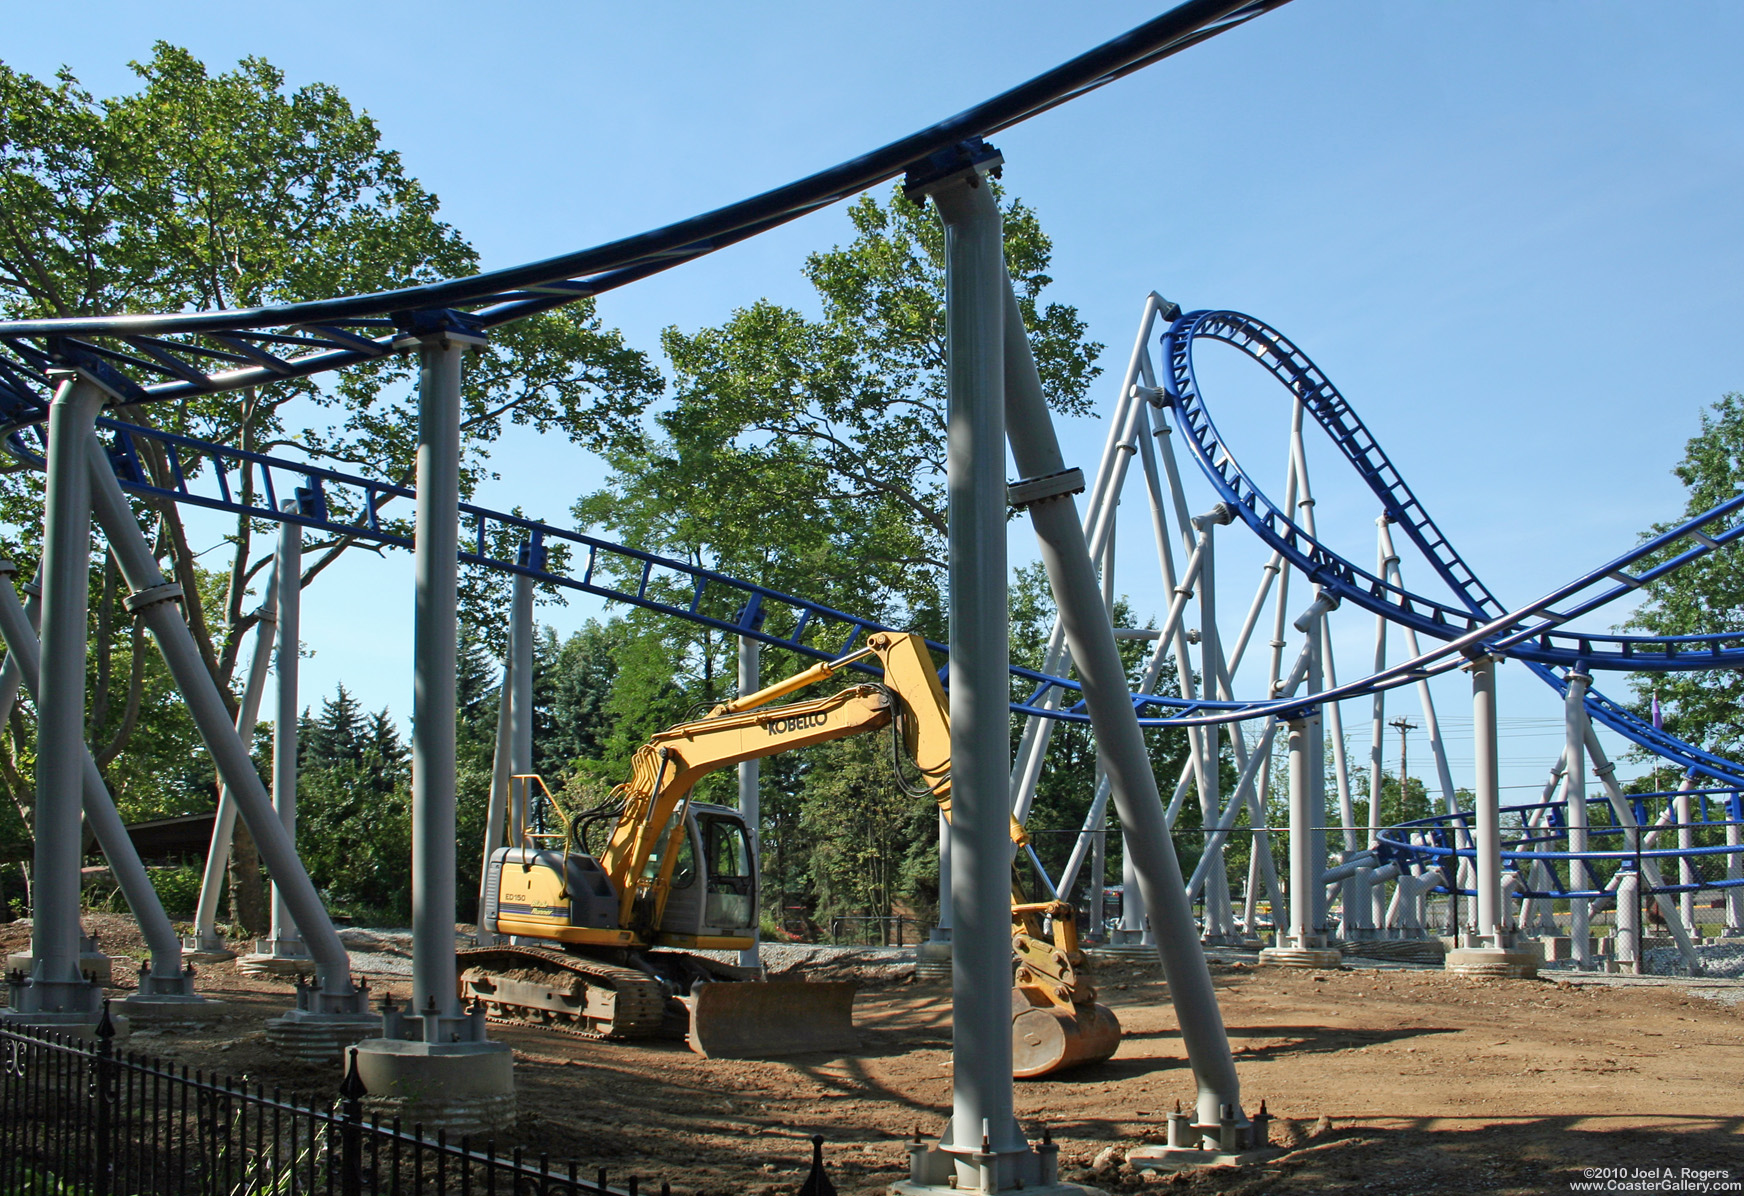 Construction equipment and a roller coaster